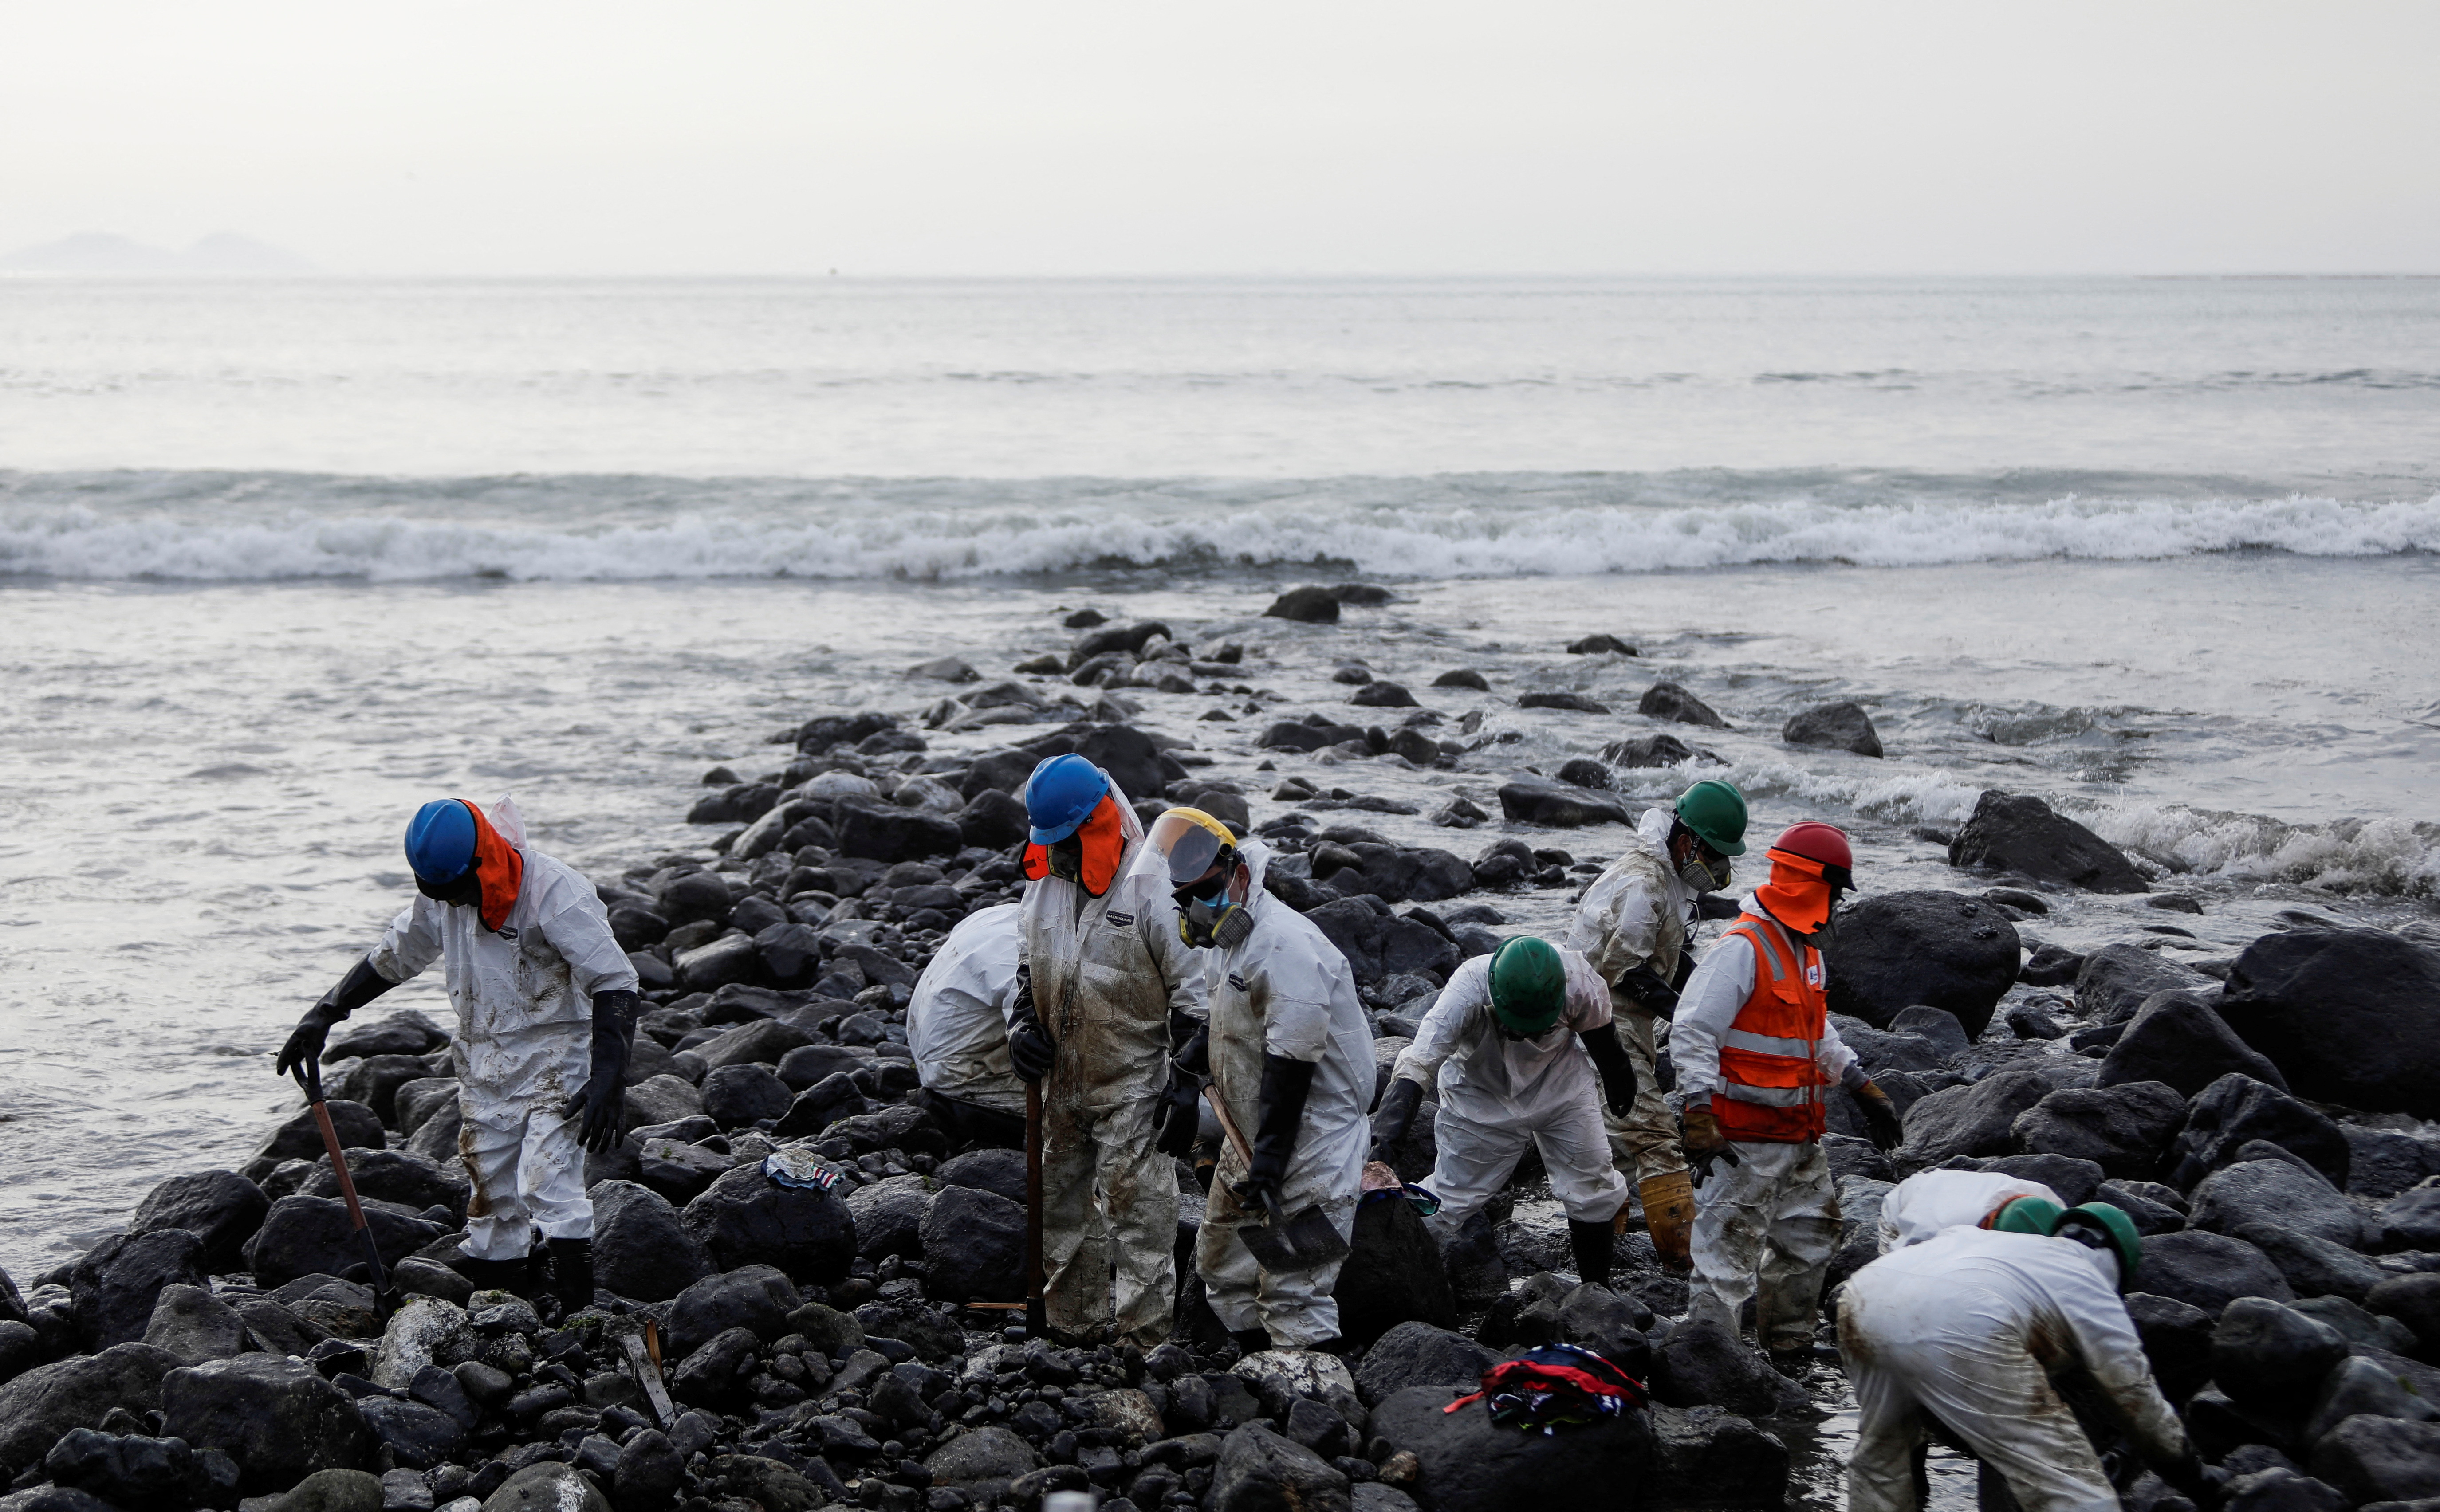 Workers clean up an oil spill at the beach as demonstrators take part in a protest outside Repsol's La Pampilla refinery in Ventanilla